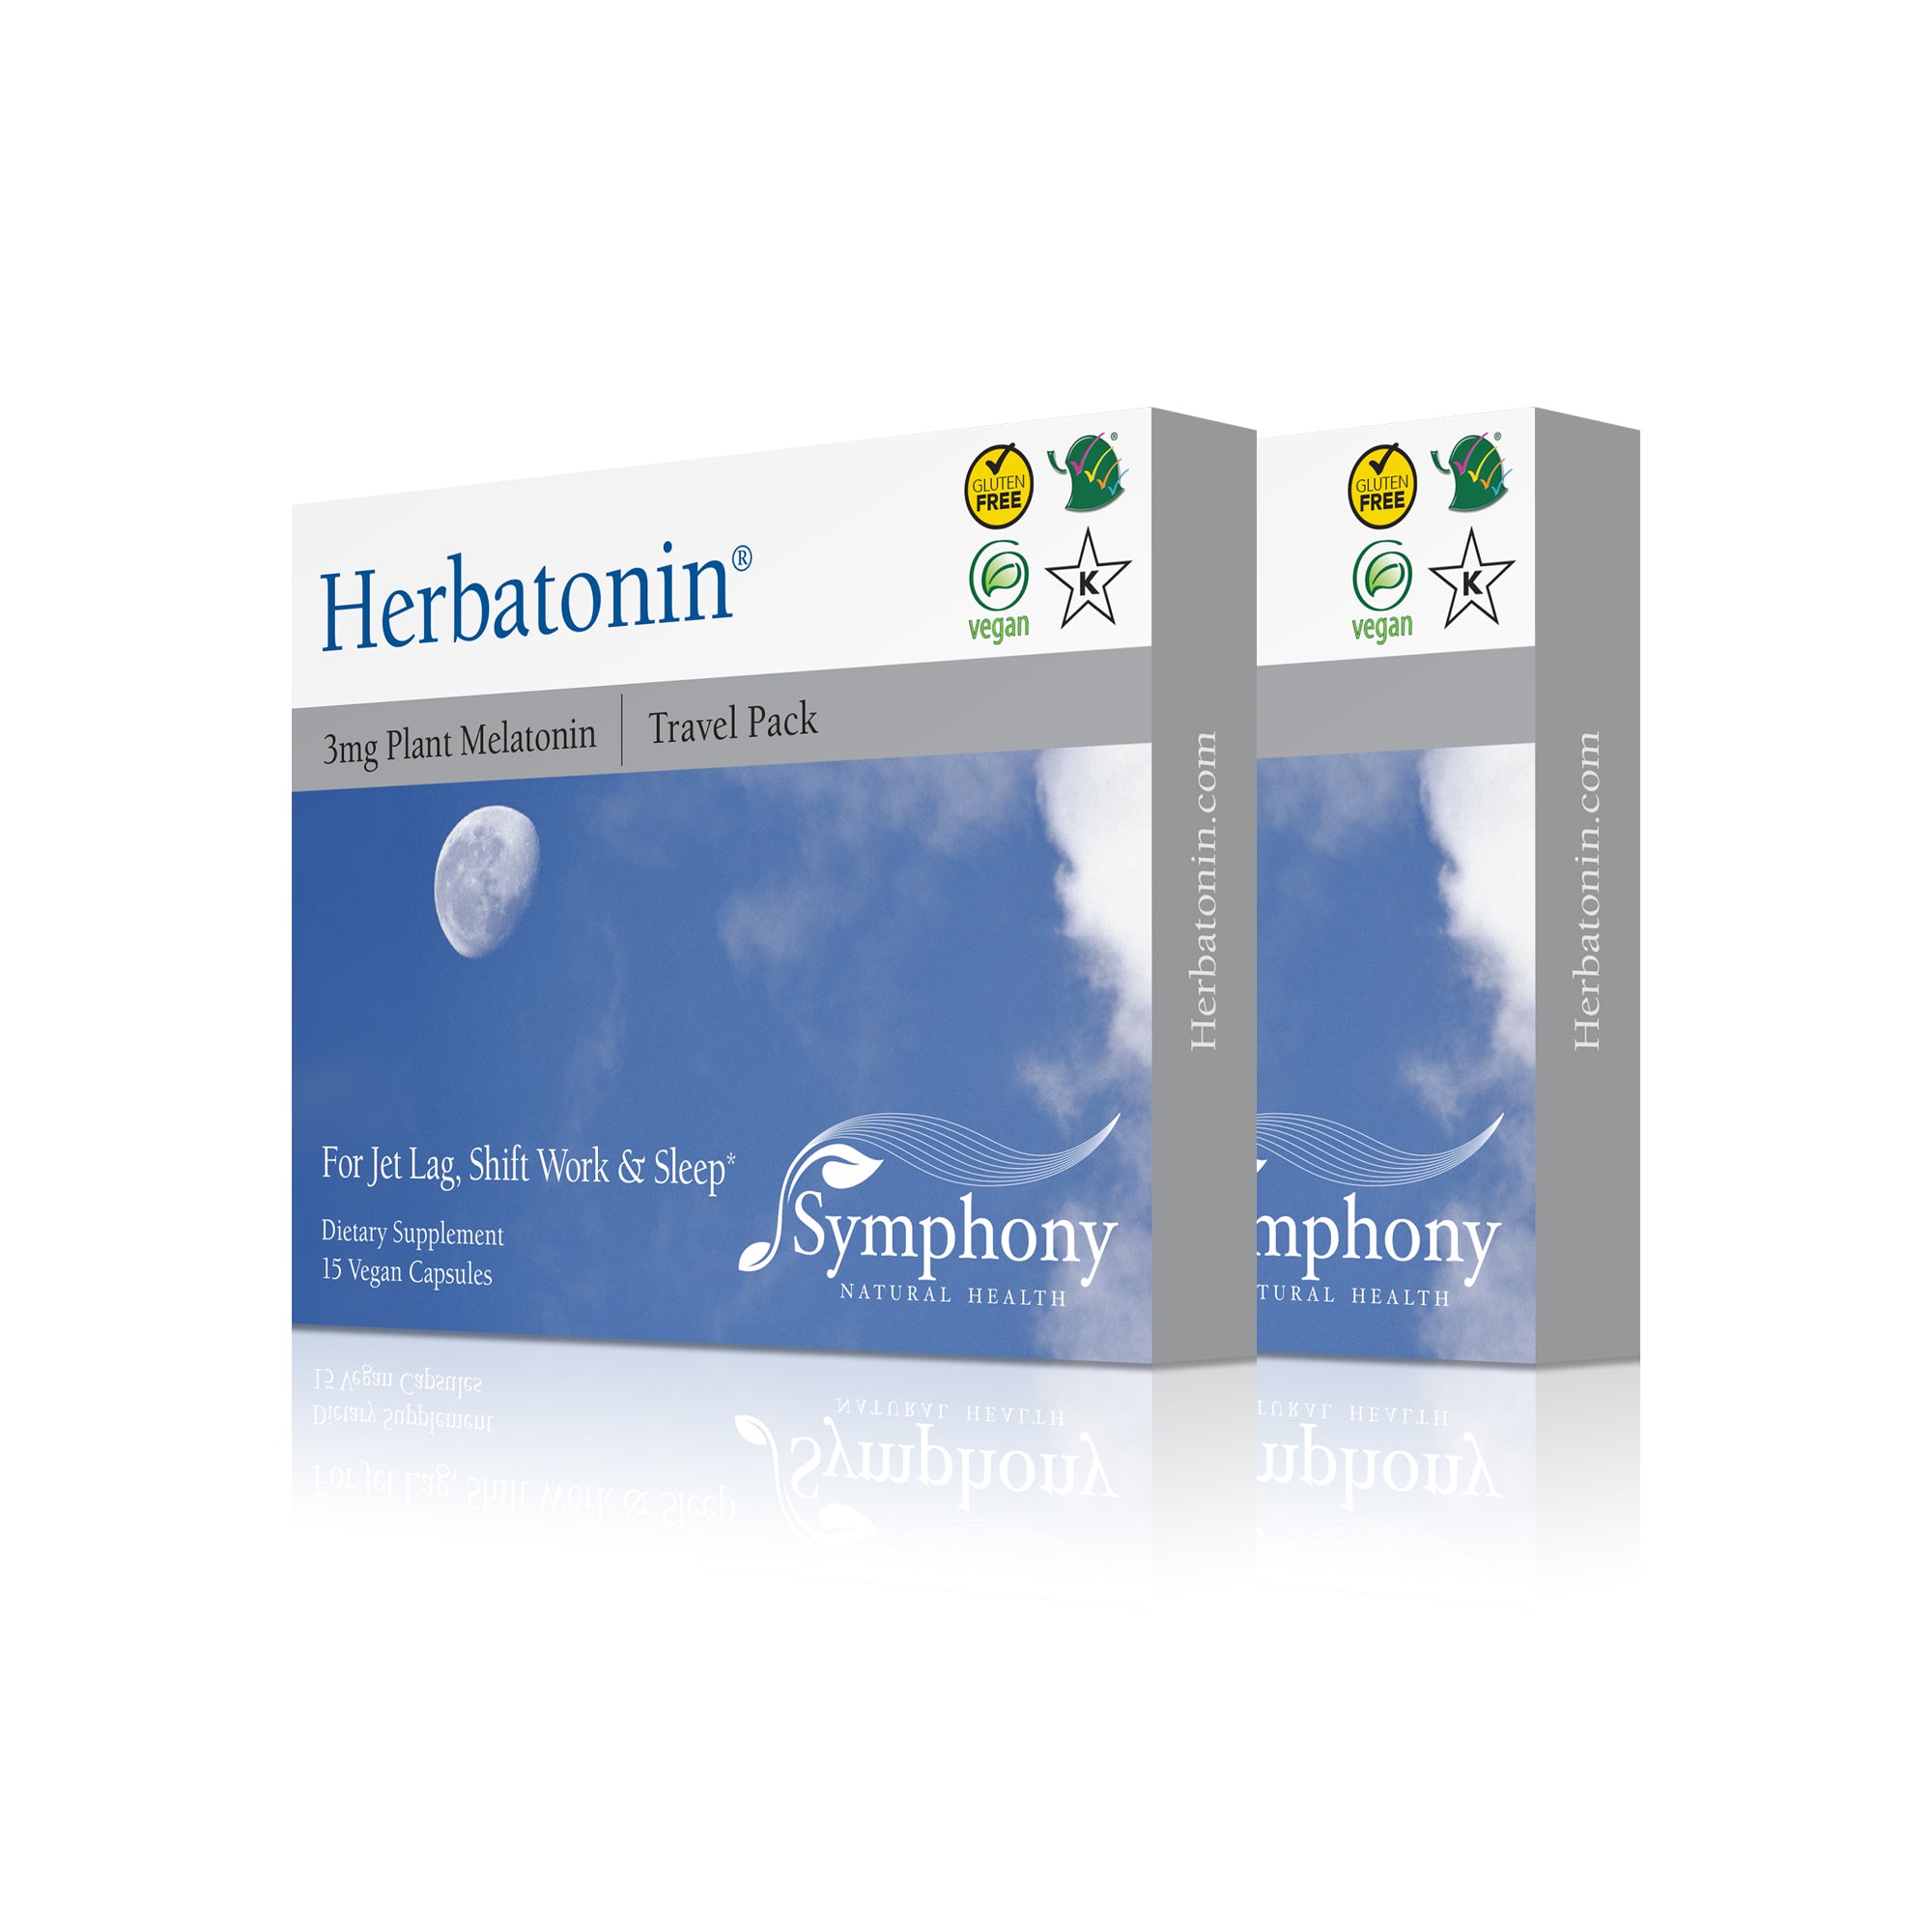 Herbatonin 3mg Travel 2-Pack left-facing front and side of two product boxes Herbatonin blue logo on white background, moon in daylight blue sky and clouds, gluten free, vegan and Kosher logos, symphony logo